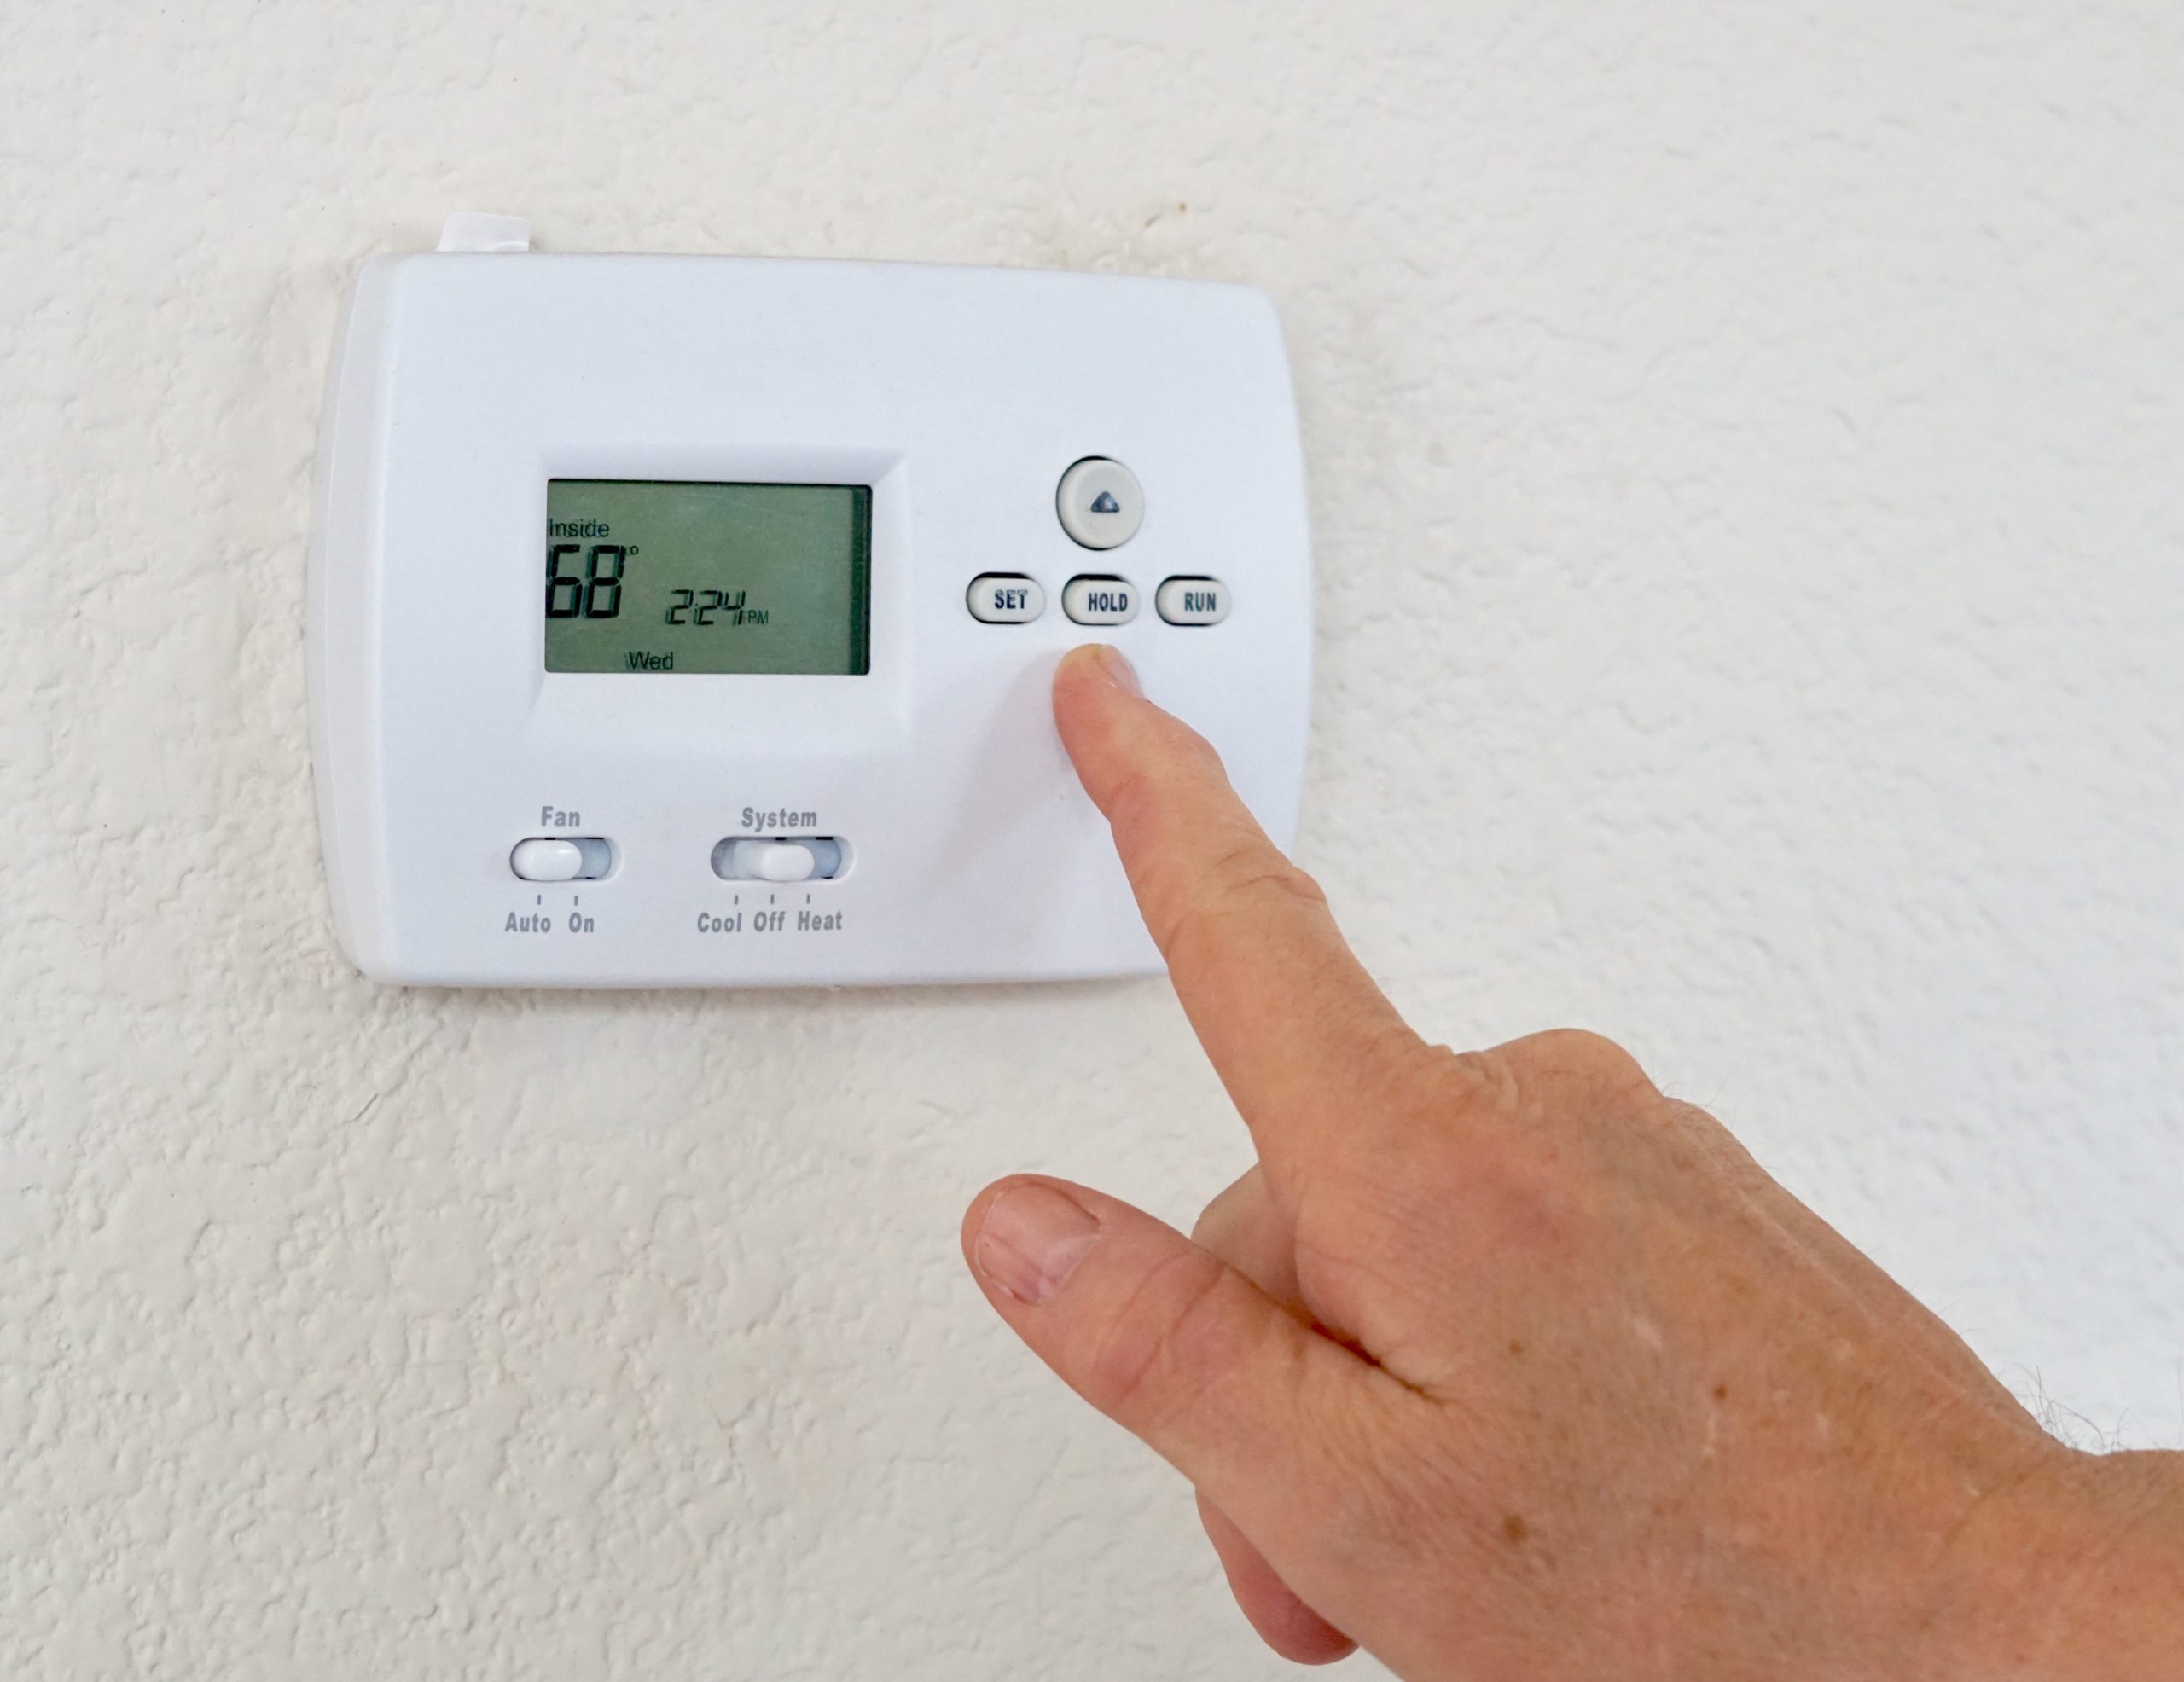 Steps to Replacing the Thermostat in Your Home